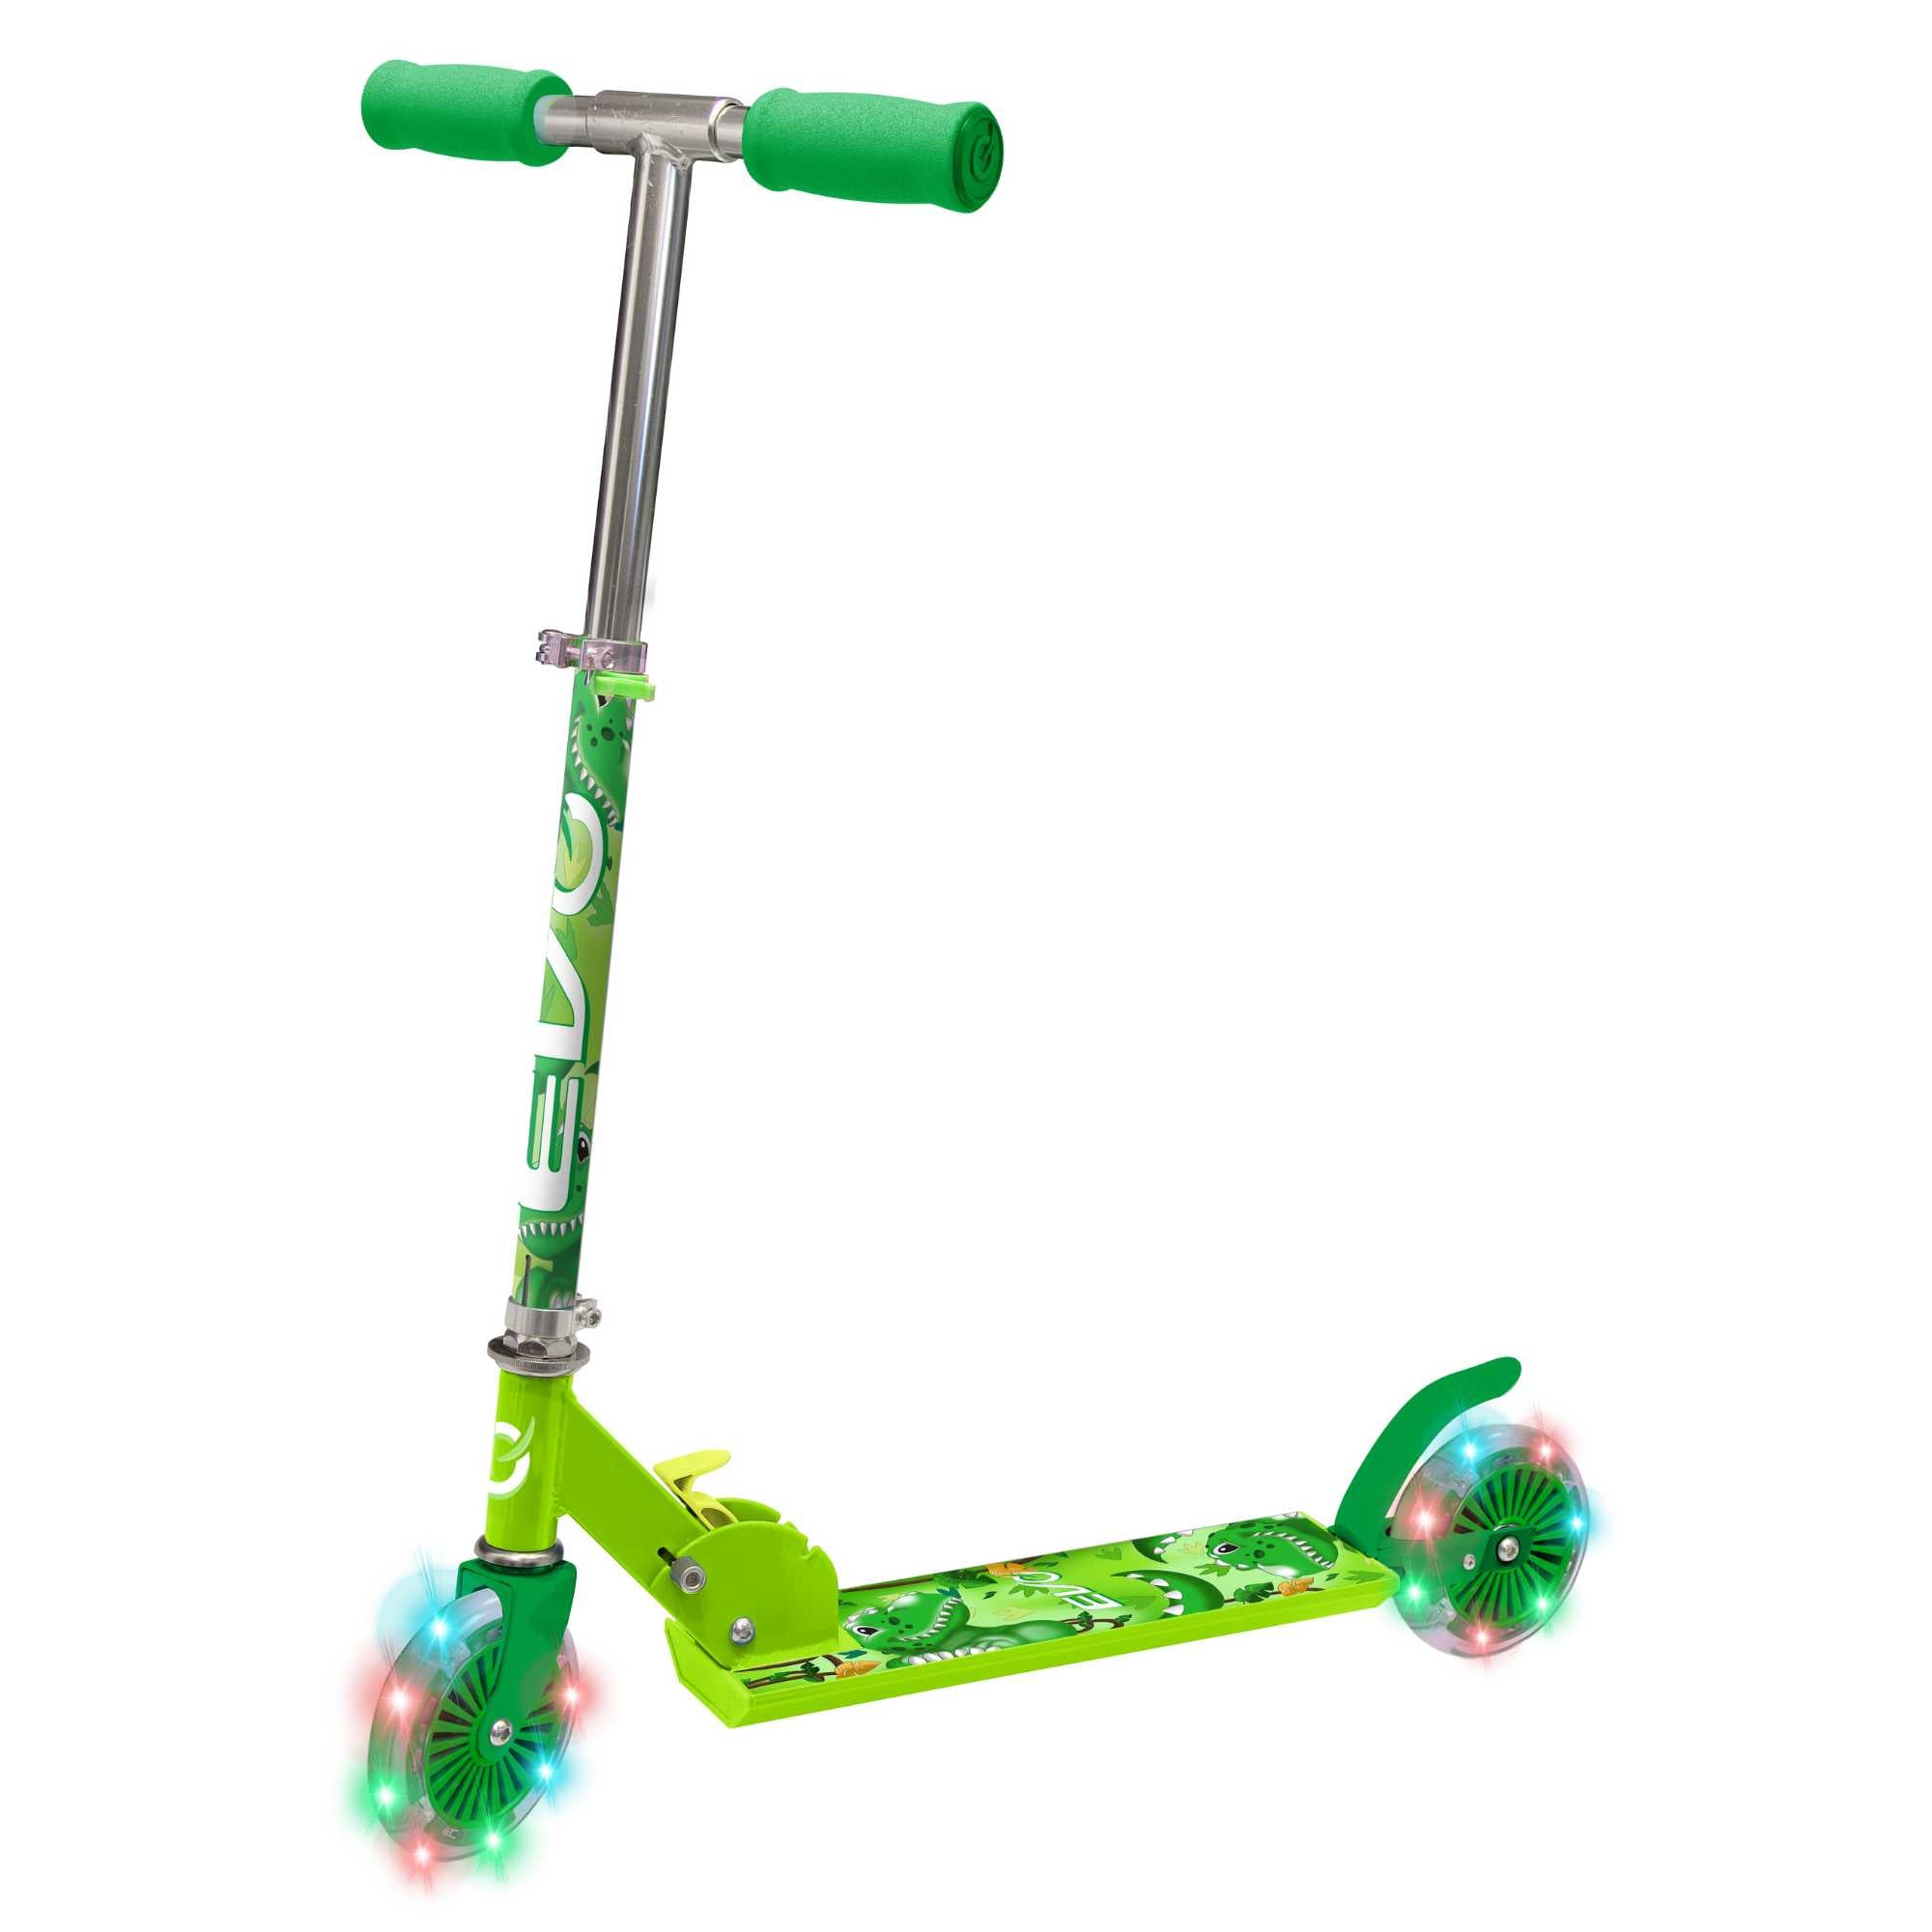 Inline Scooter, Dinosaur Toys, Light Up Scooter, Scooter For 5 Year Olds, Push Scooter, Two Wheeled Scooter, Folding Scooter